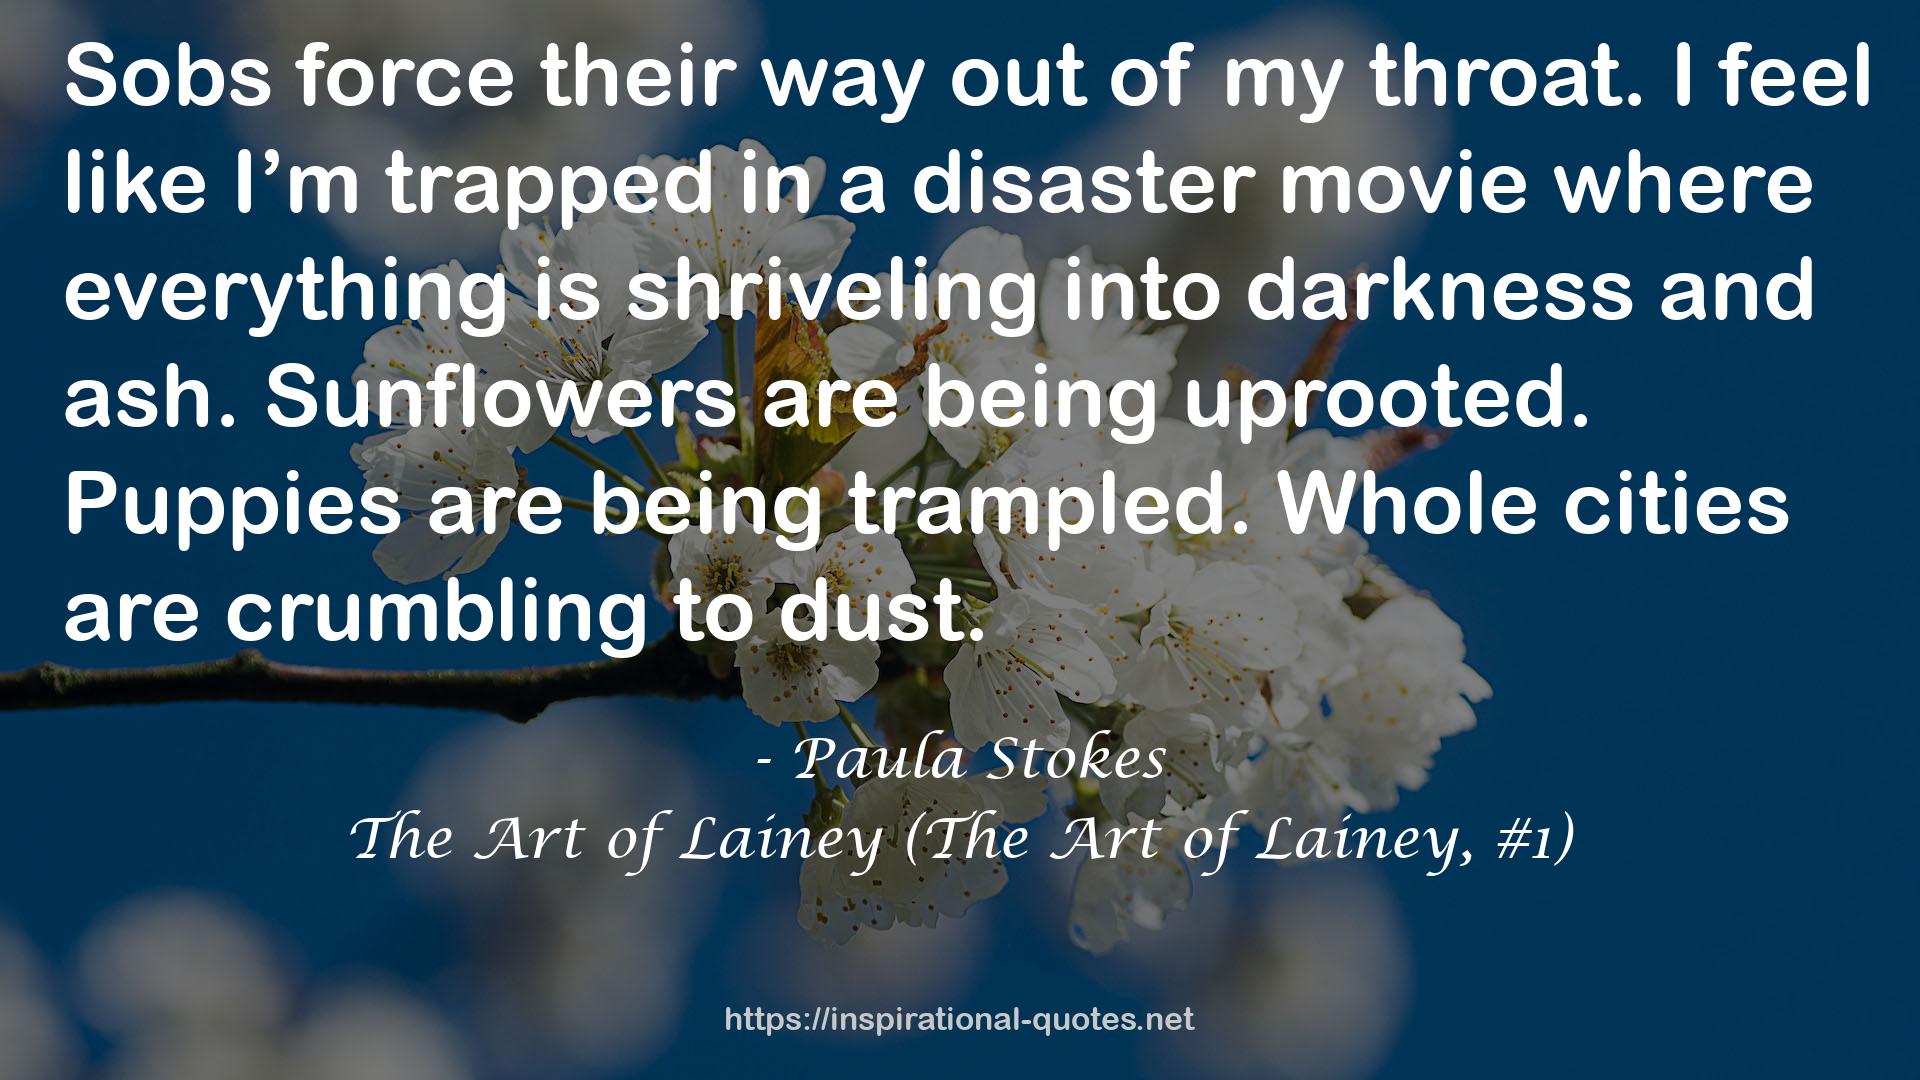 The Art of Lainey (The Art of Lainey, #1) QUOTES